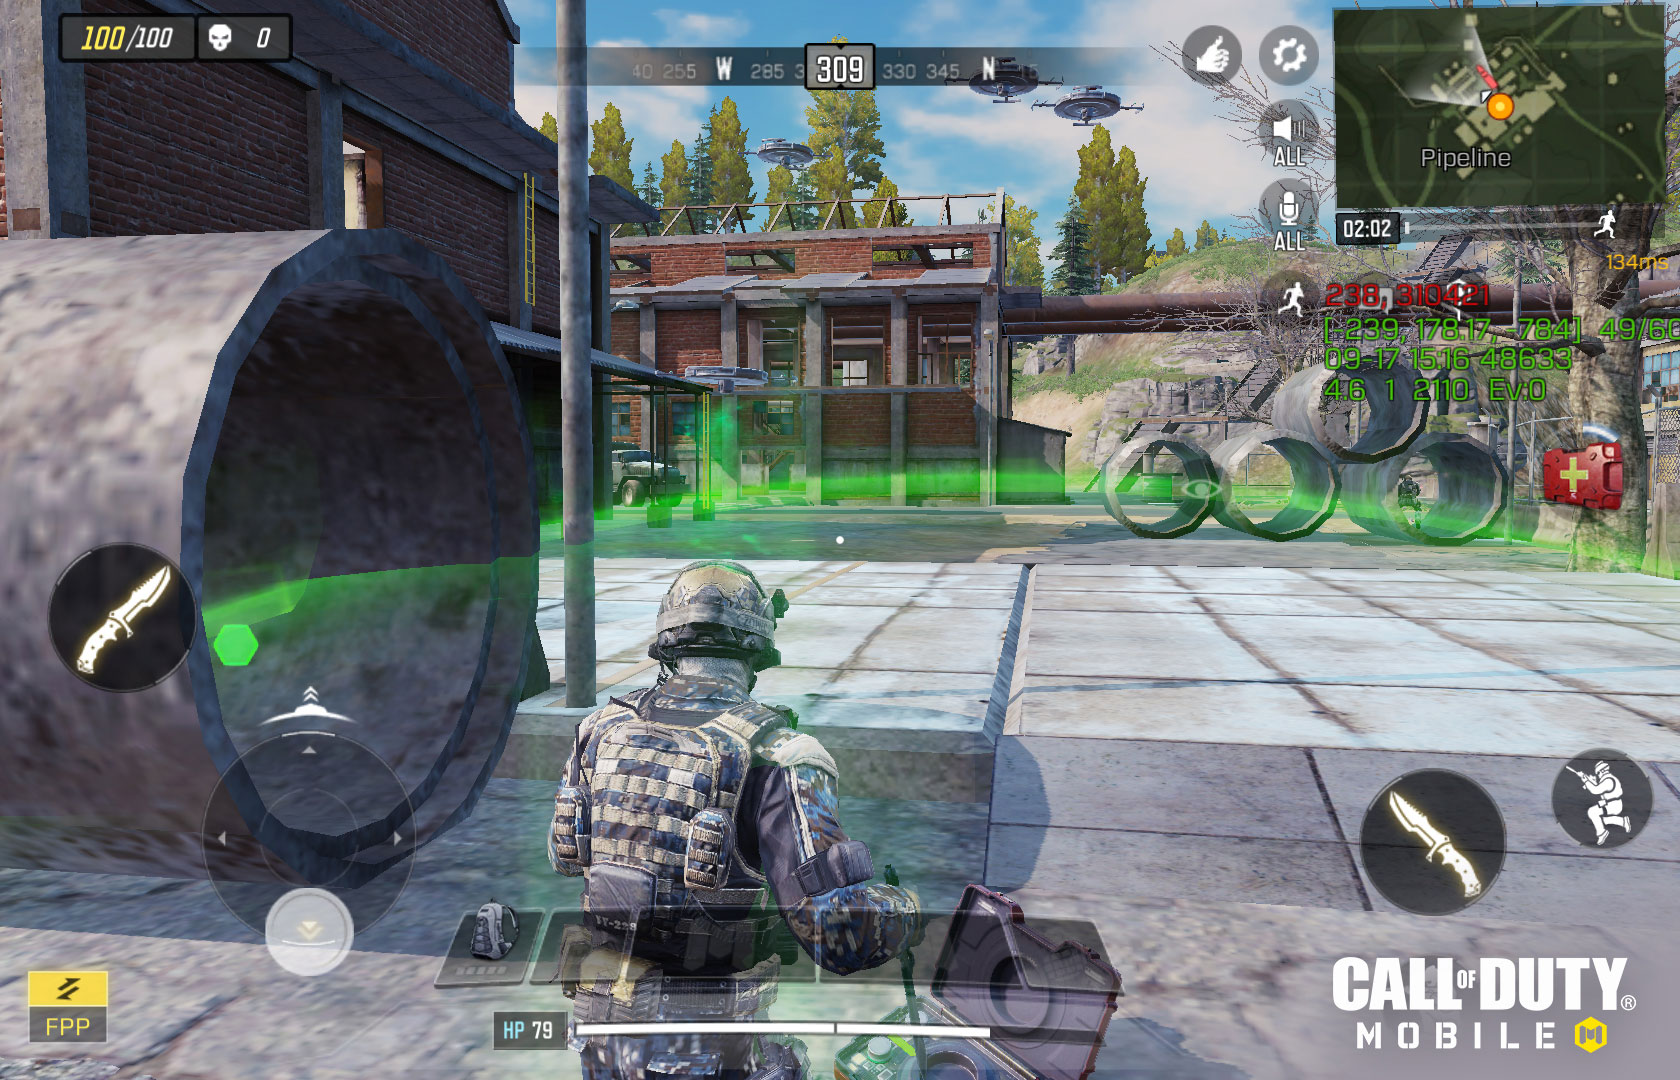 How to link your Call of Duty Mobile with official COD account